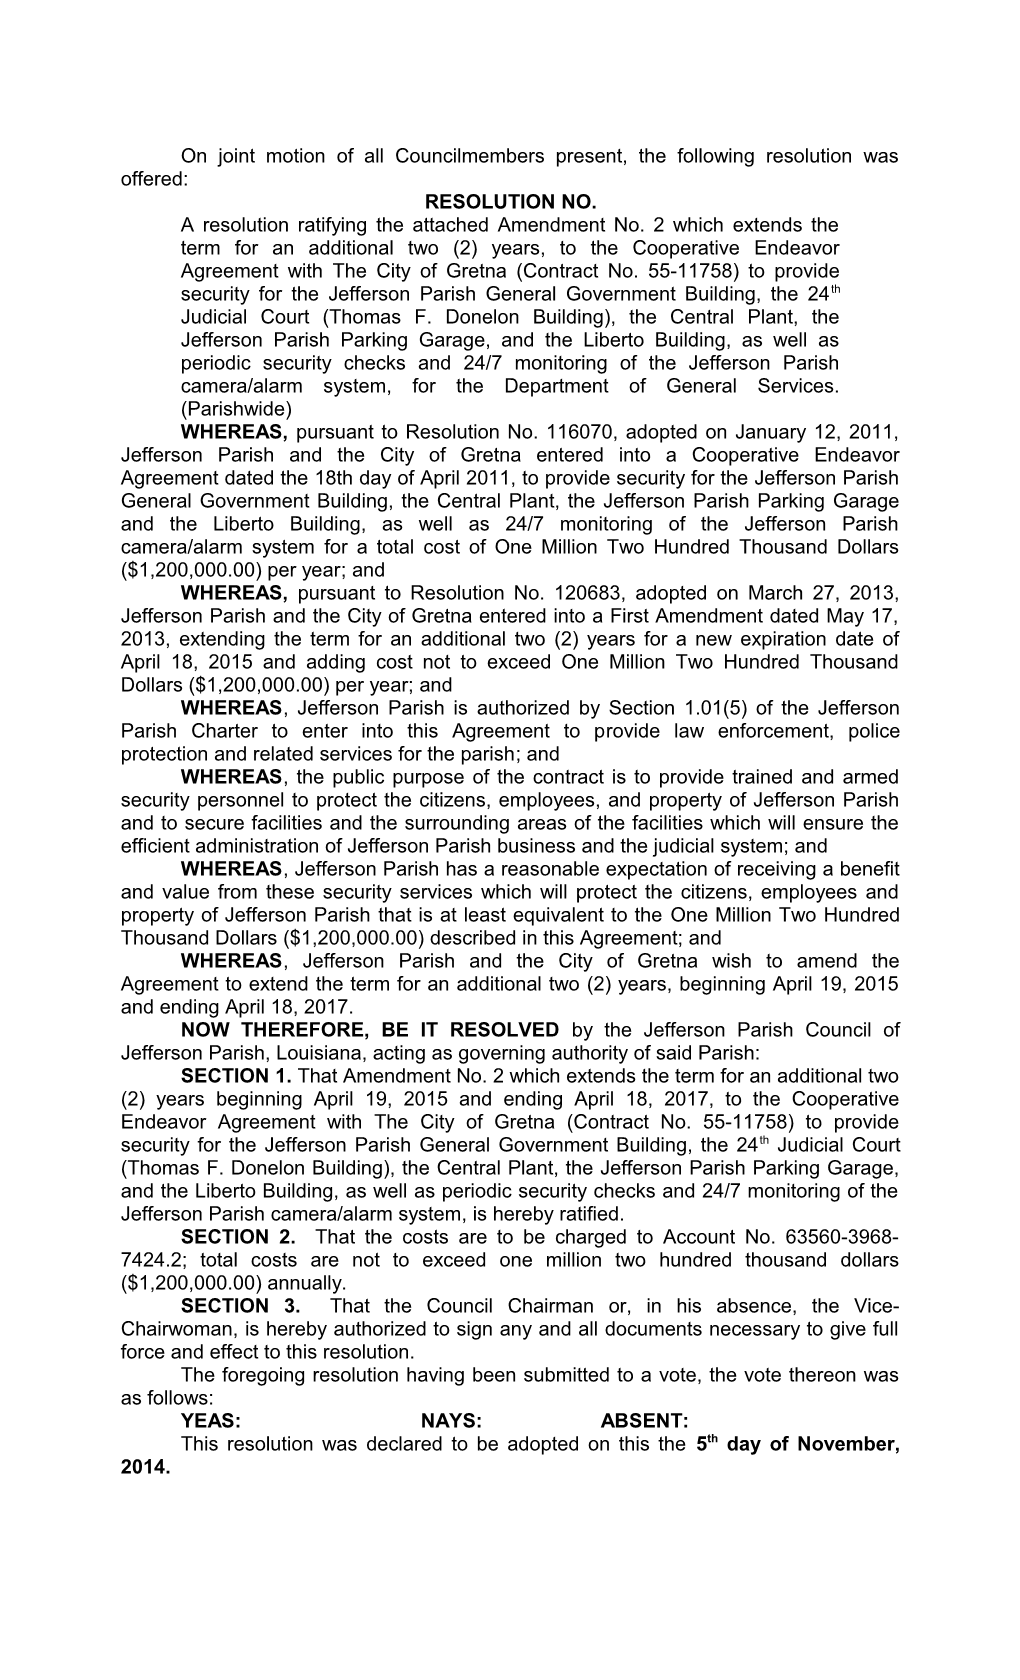 On Joint Motion of All Councilmembers Present, the Following Resolution Was Offered s3